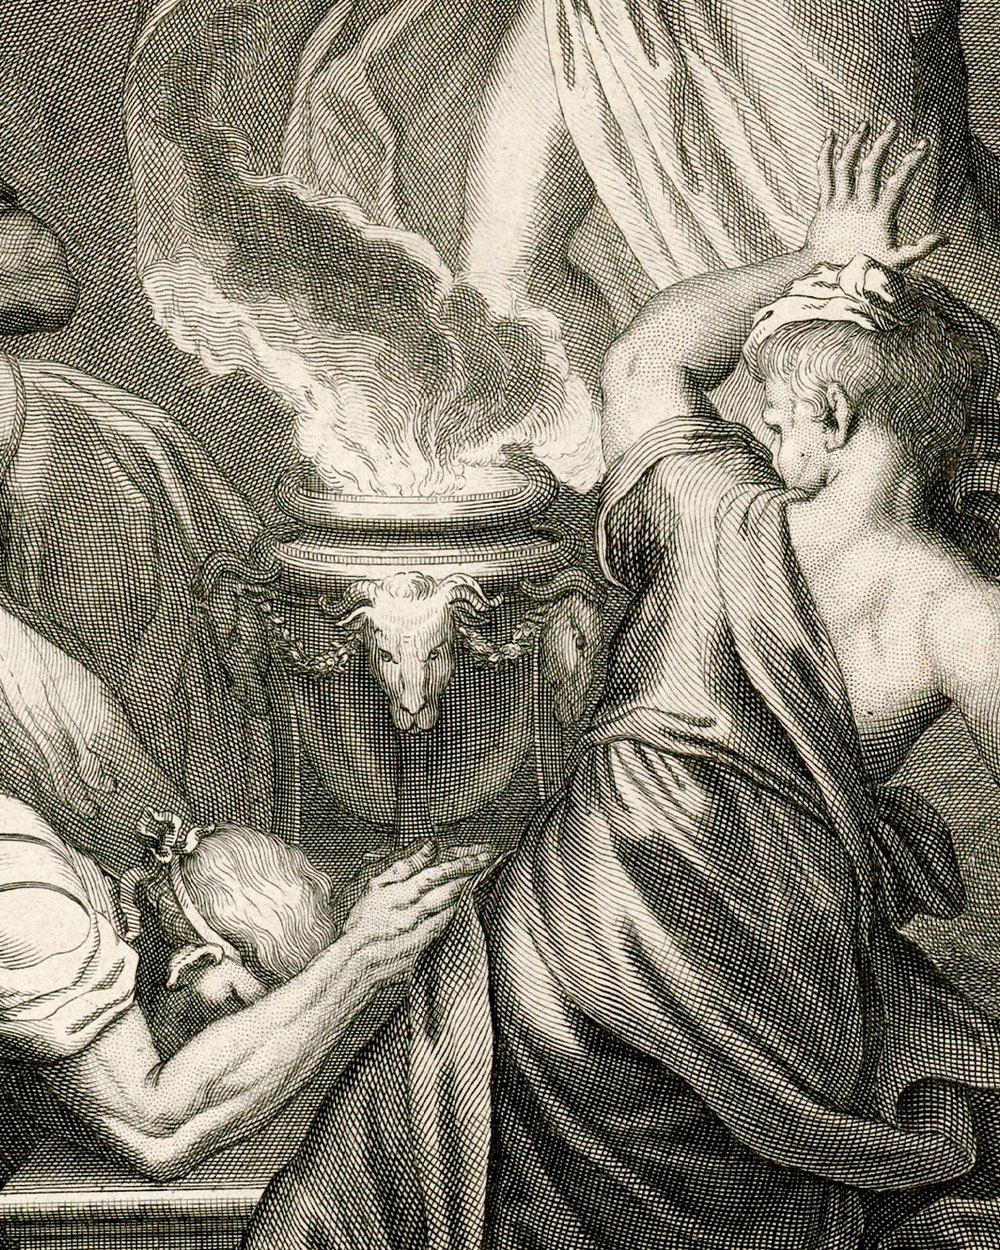 "Saul with the Witch of Endor" (1685 - 1732)